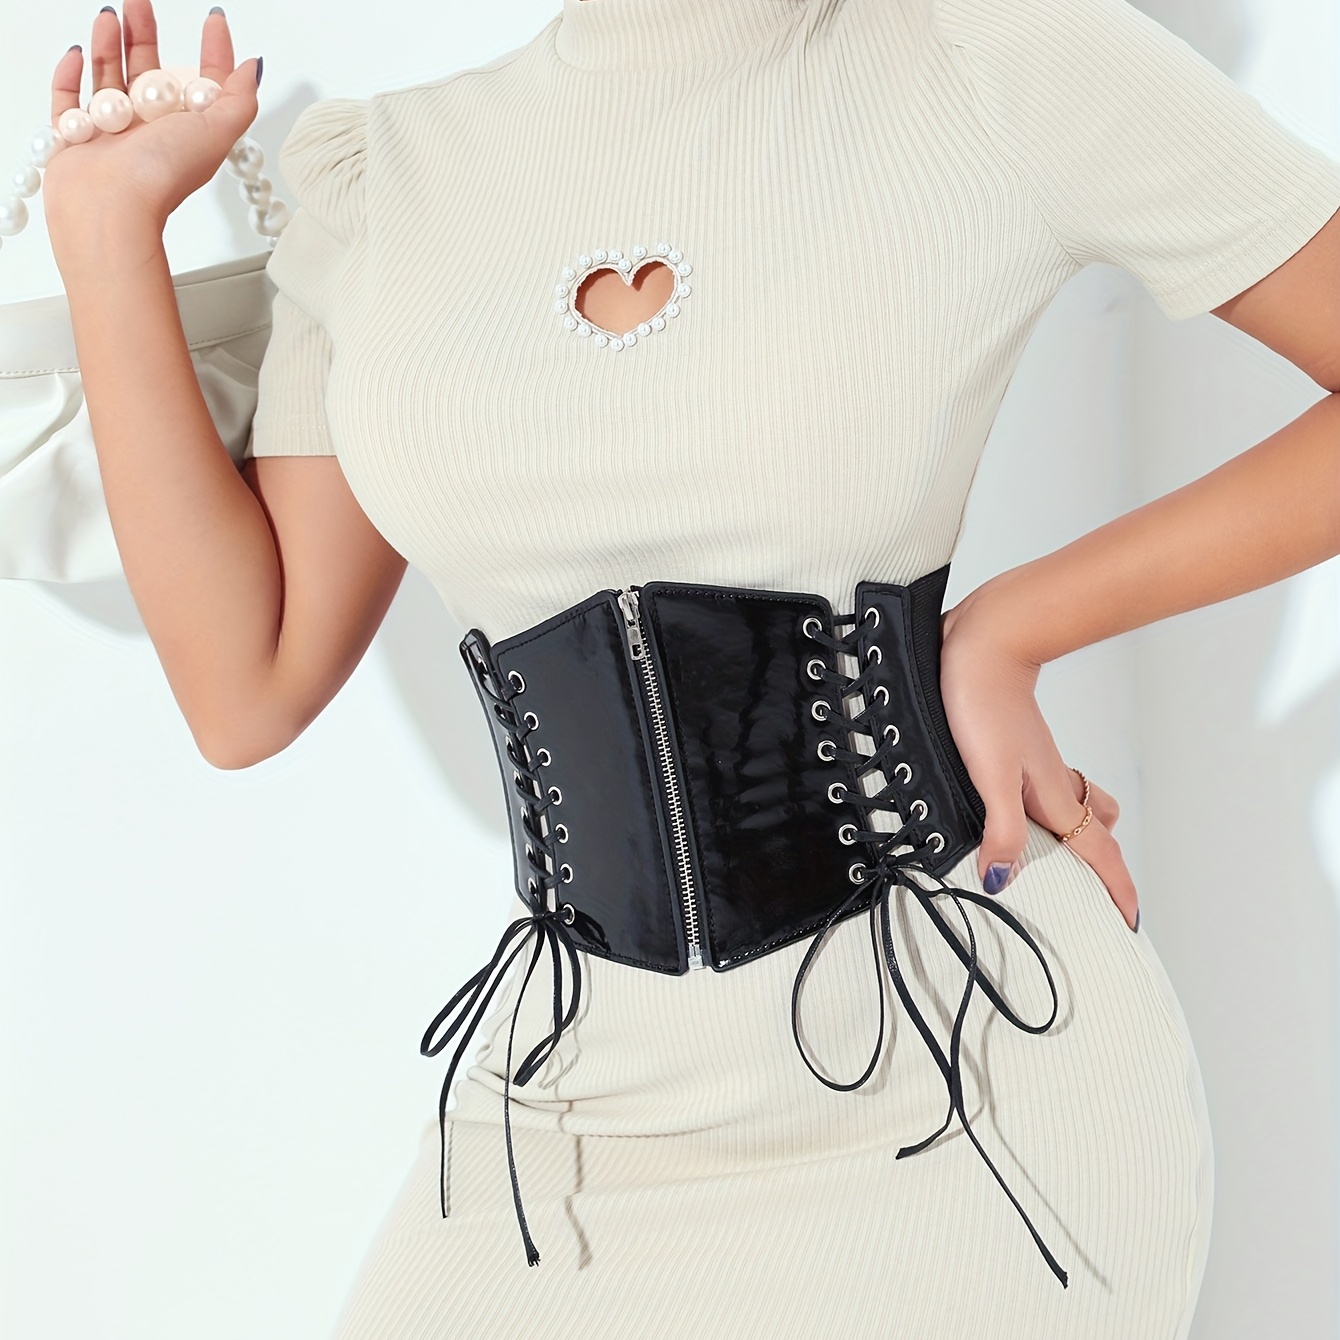 Urieo Elastic Rose Embroidered Lace-up Corset Belt Stretchy Tied Black  Waspie Belts Wide Halloween Party Dress Cincher Waist Belt for Women at   Women's Clothing store